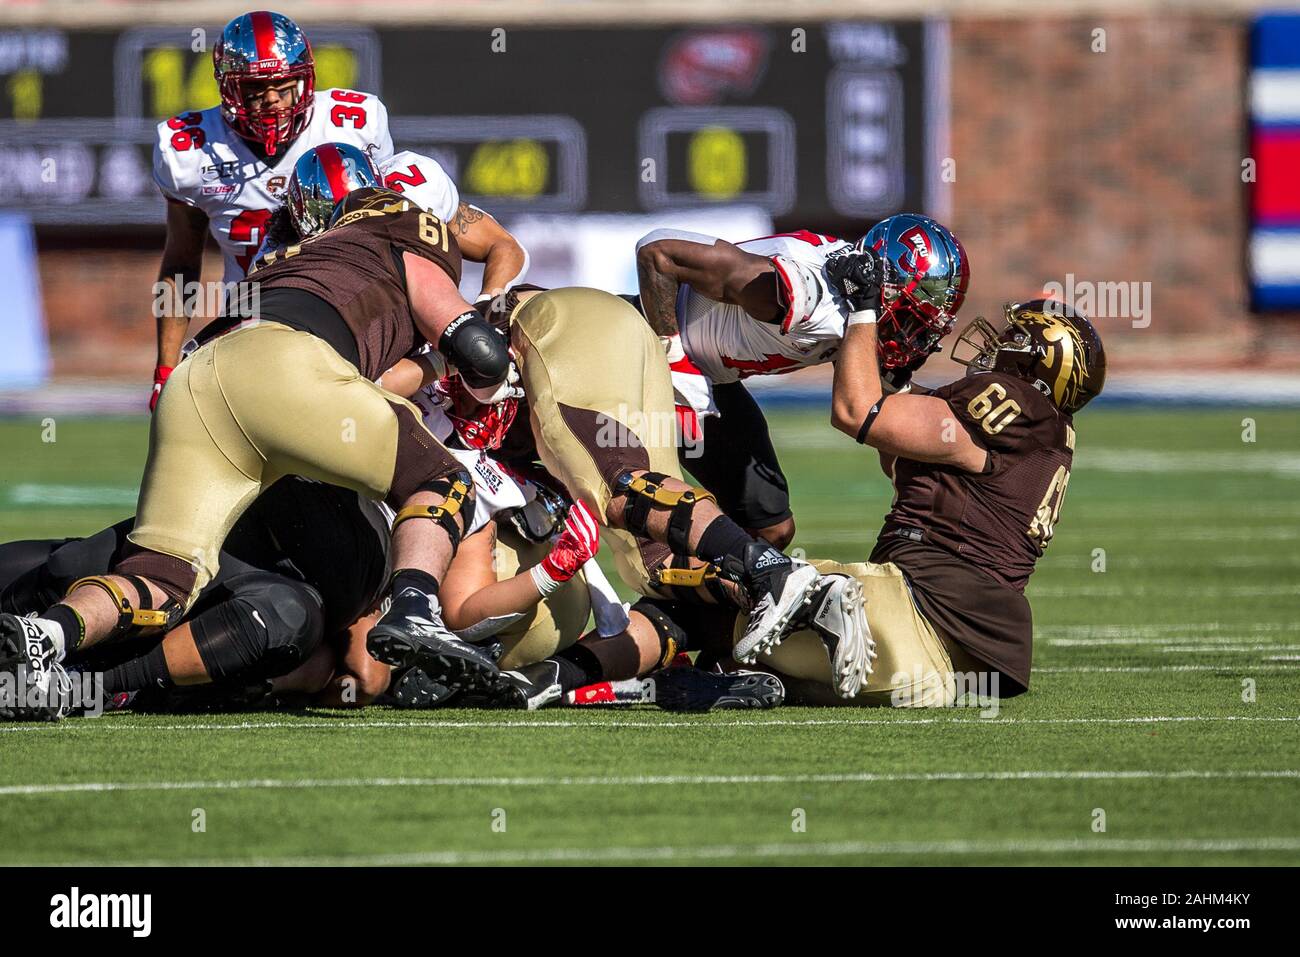 Dallas, Texas, USA. 30th Dec, 2019. Western Michigan Broncos offensive tackle Mark Brooks (60) in action during the Servpro First Responder Bowl game between Western Michigan Broncos and the Western Kentucky Hilltoppers at the gerald Ford Stadiuml Stadium in Dallas, Texas. Credit: Dan Wozniak/ZUMA Wire/Alamy Live News Stock Photo